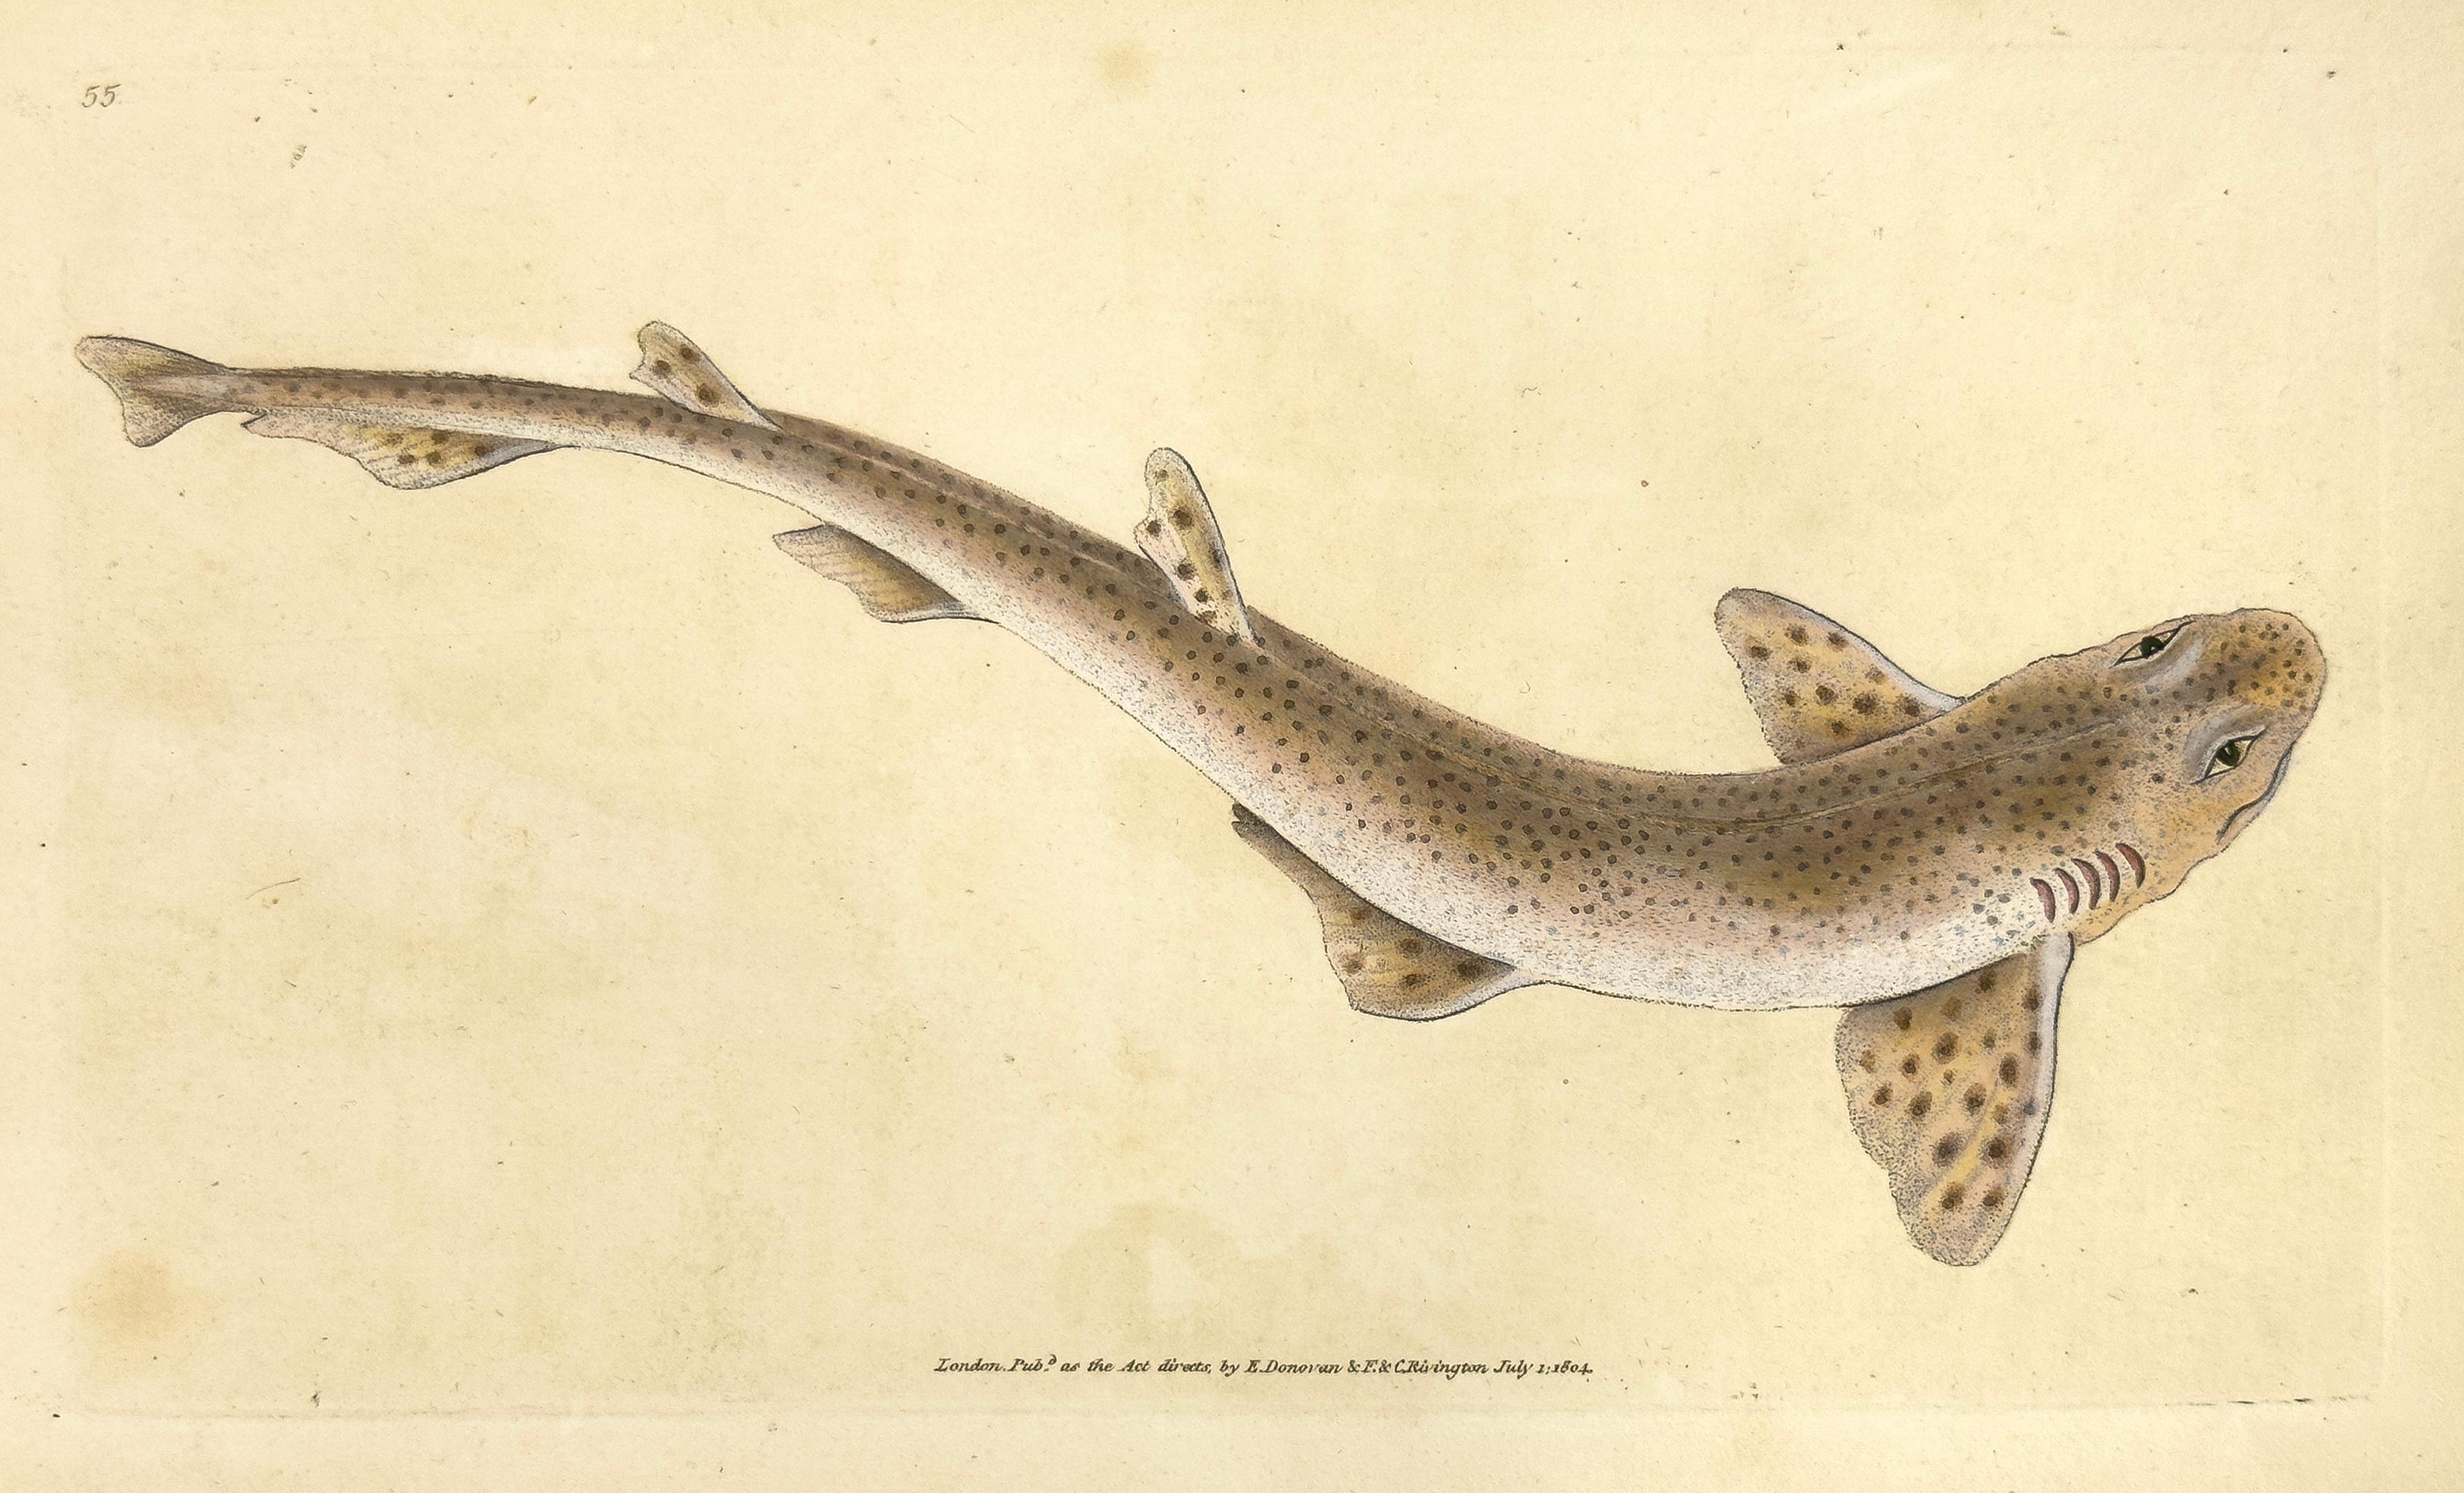 55: Squalus catulus, Lesser Spotted Shark